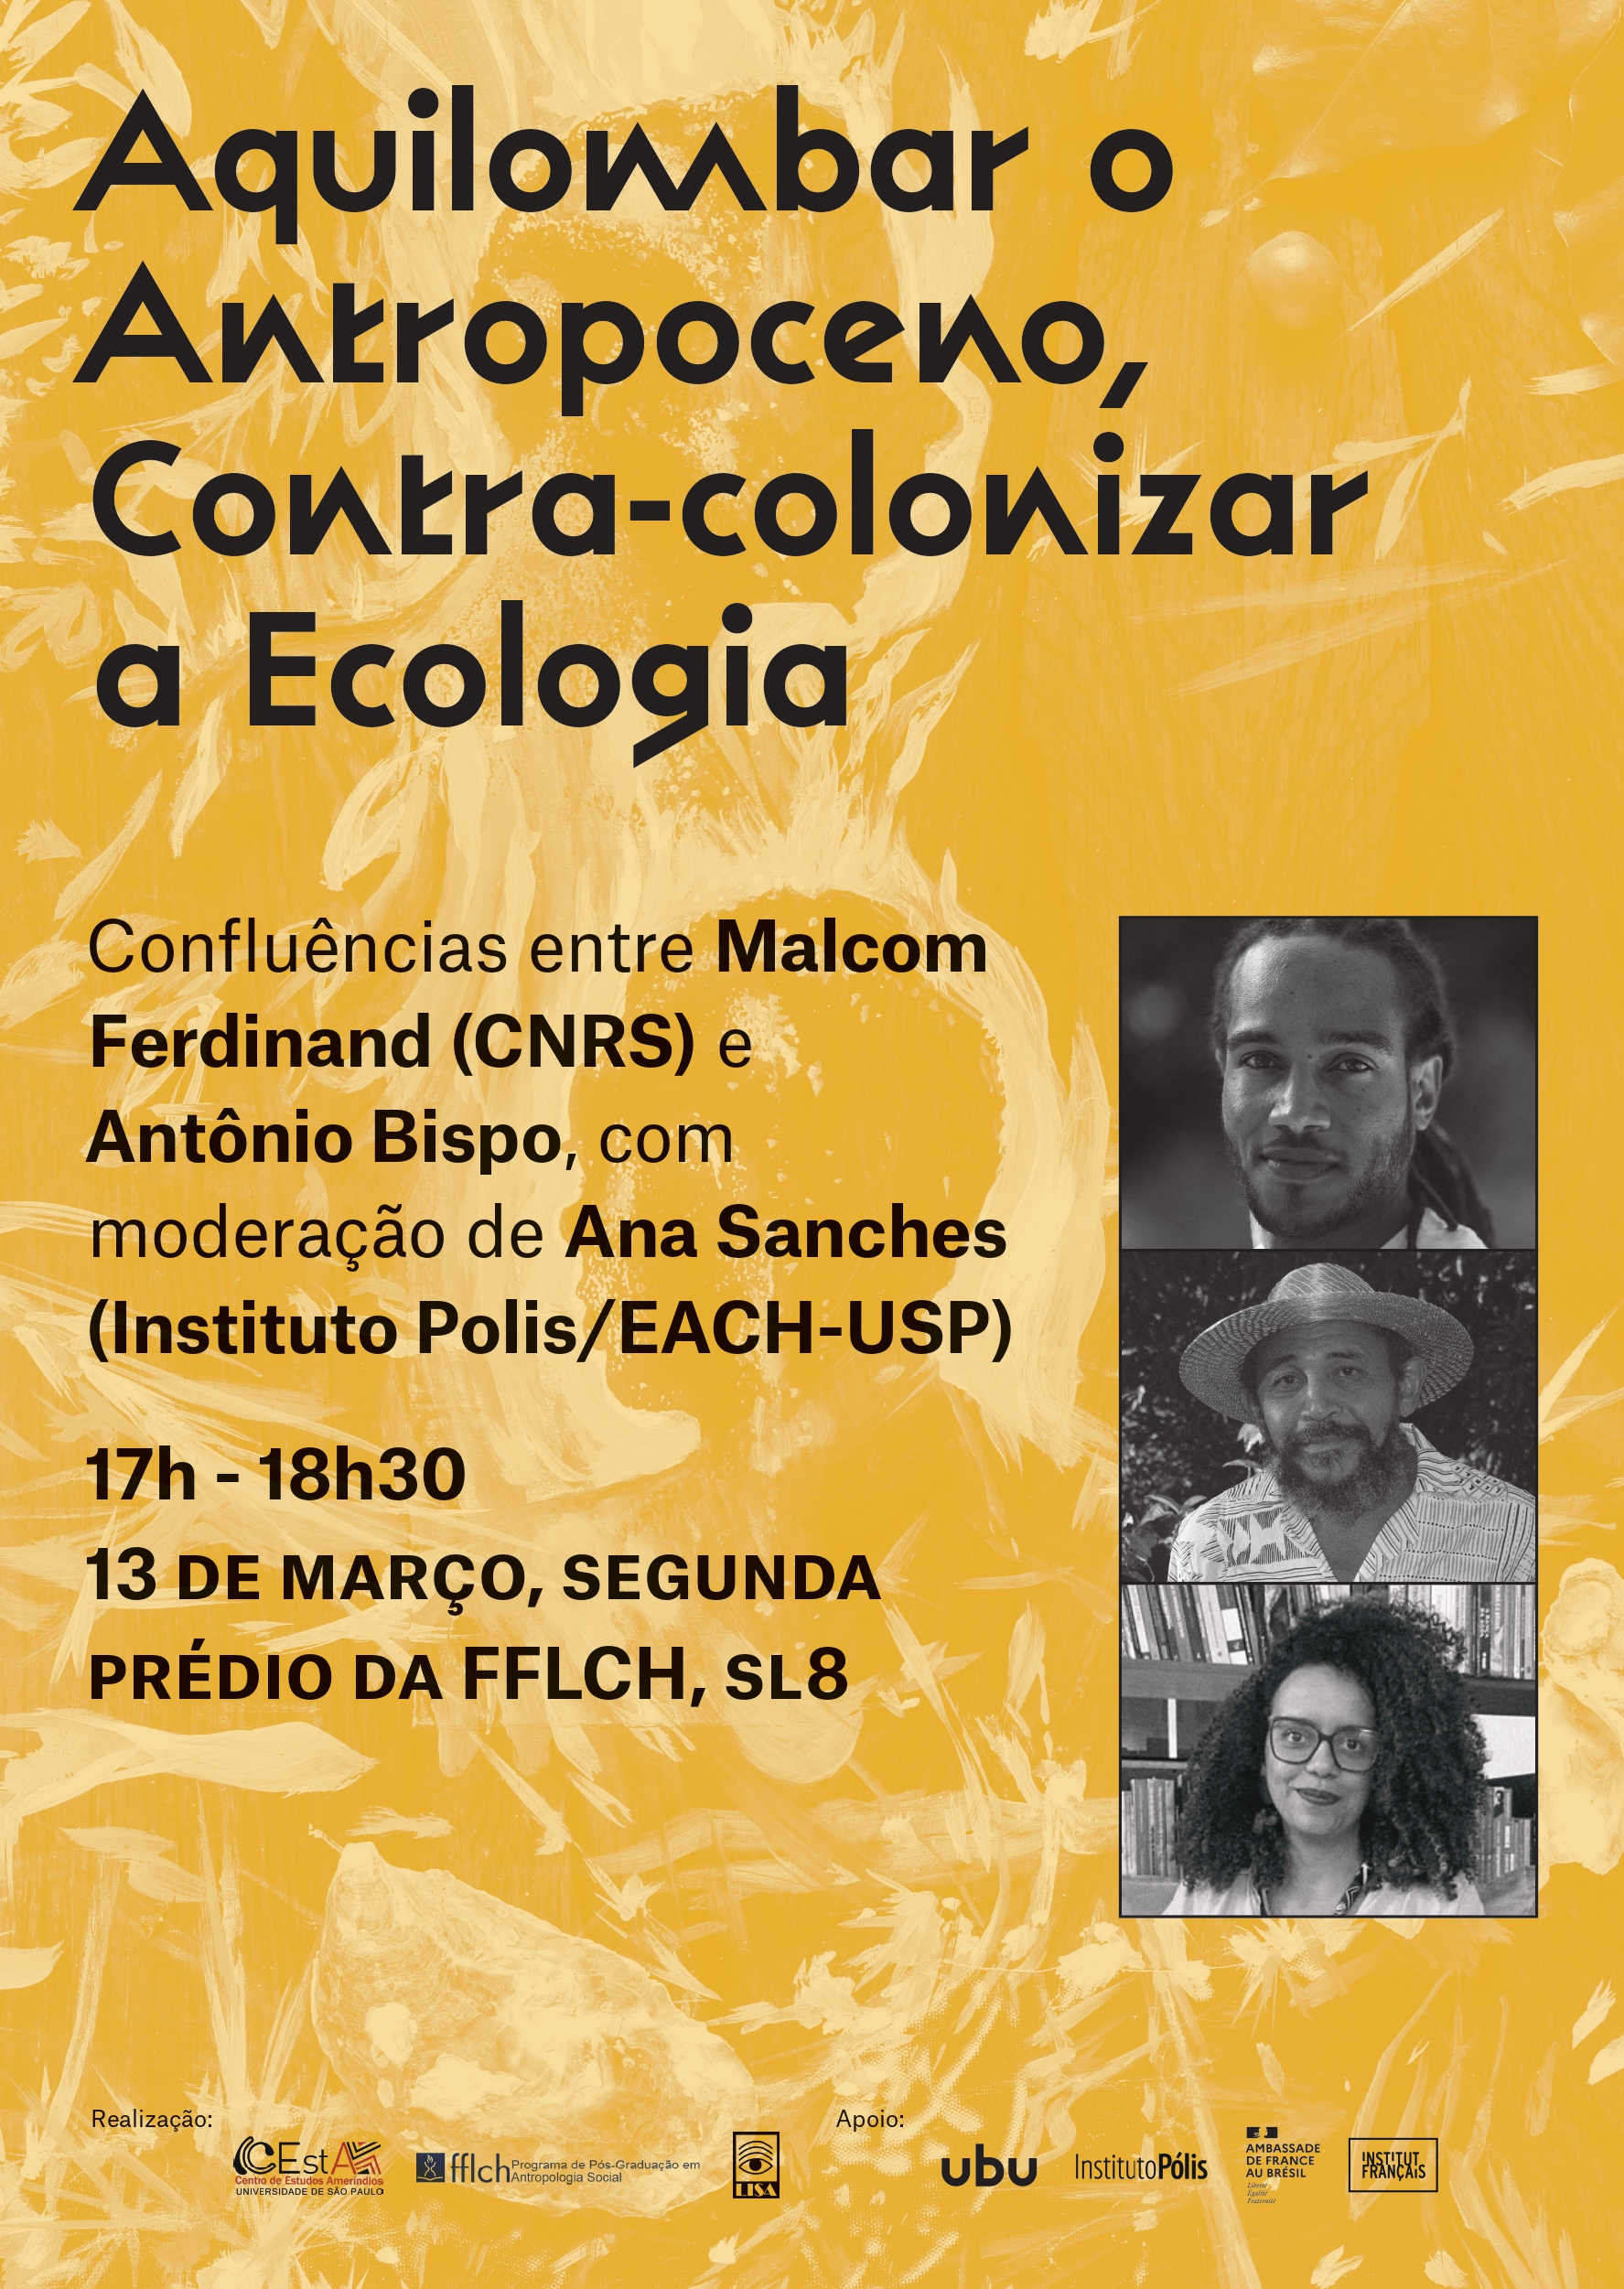 Aquilombar the Anthropocene, Counter-colonize Ecology forum for the book 'Uma Ecologia Decolonial'